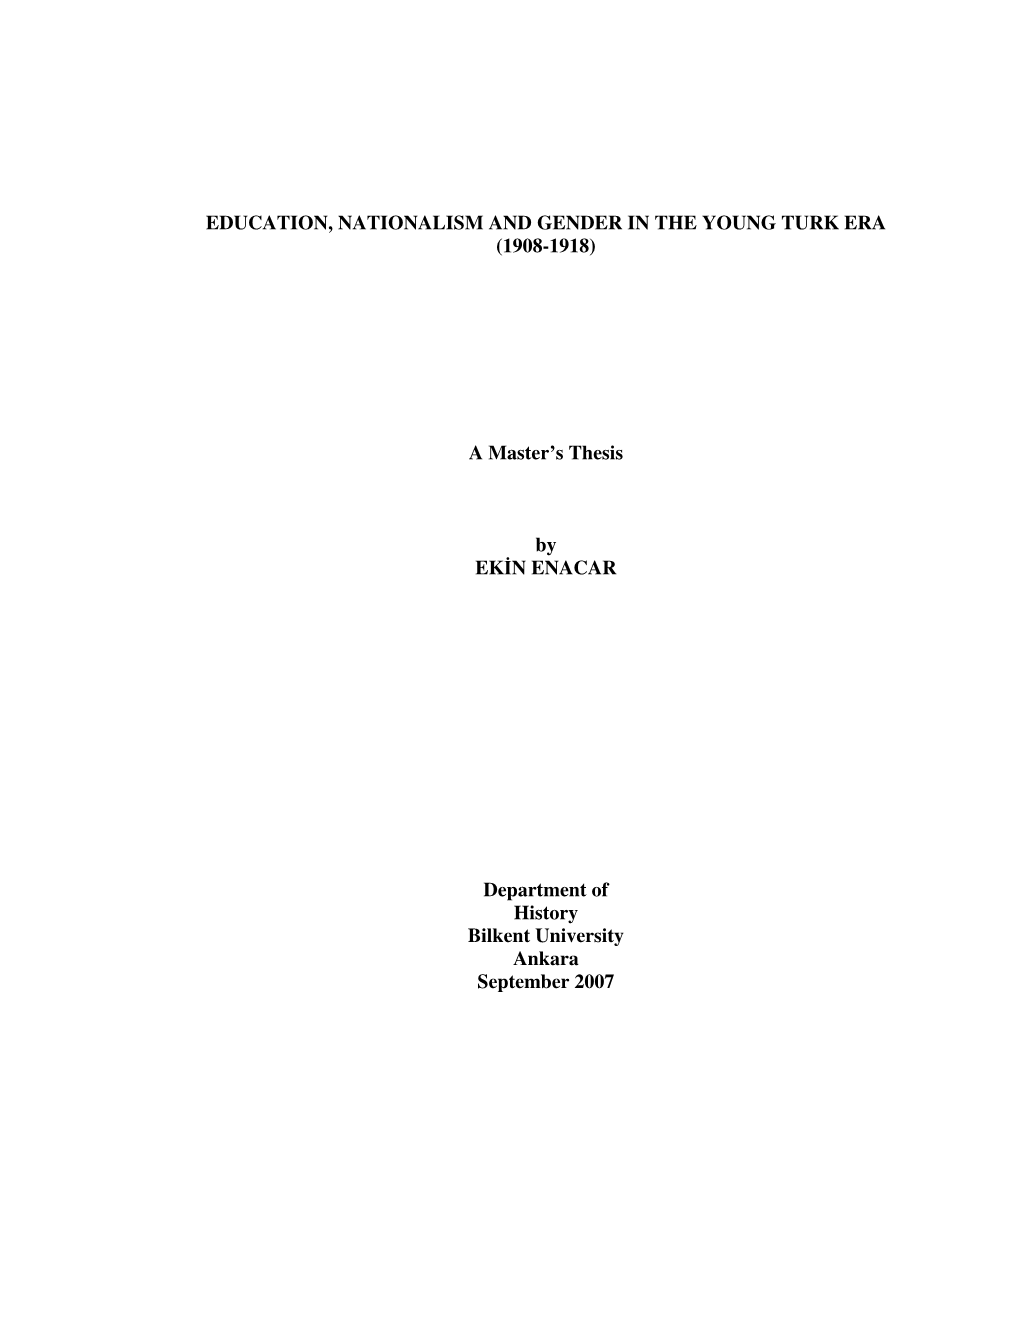 EDUCATION, NATIONALISM and GENDER in the YOUNG TURK ERA (1908-1918) a Master's Thesis by EKİN ENACAR Department of History B